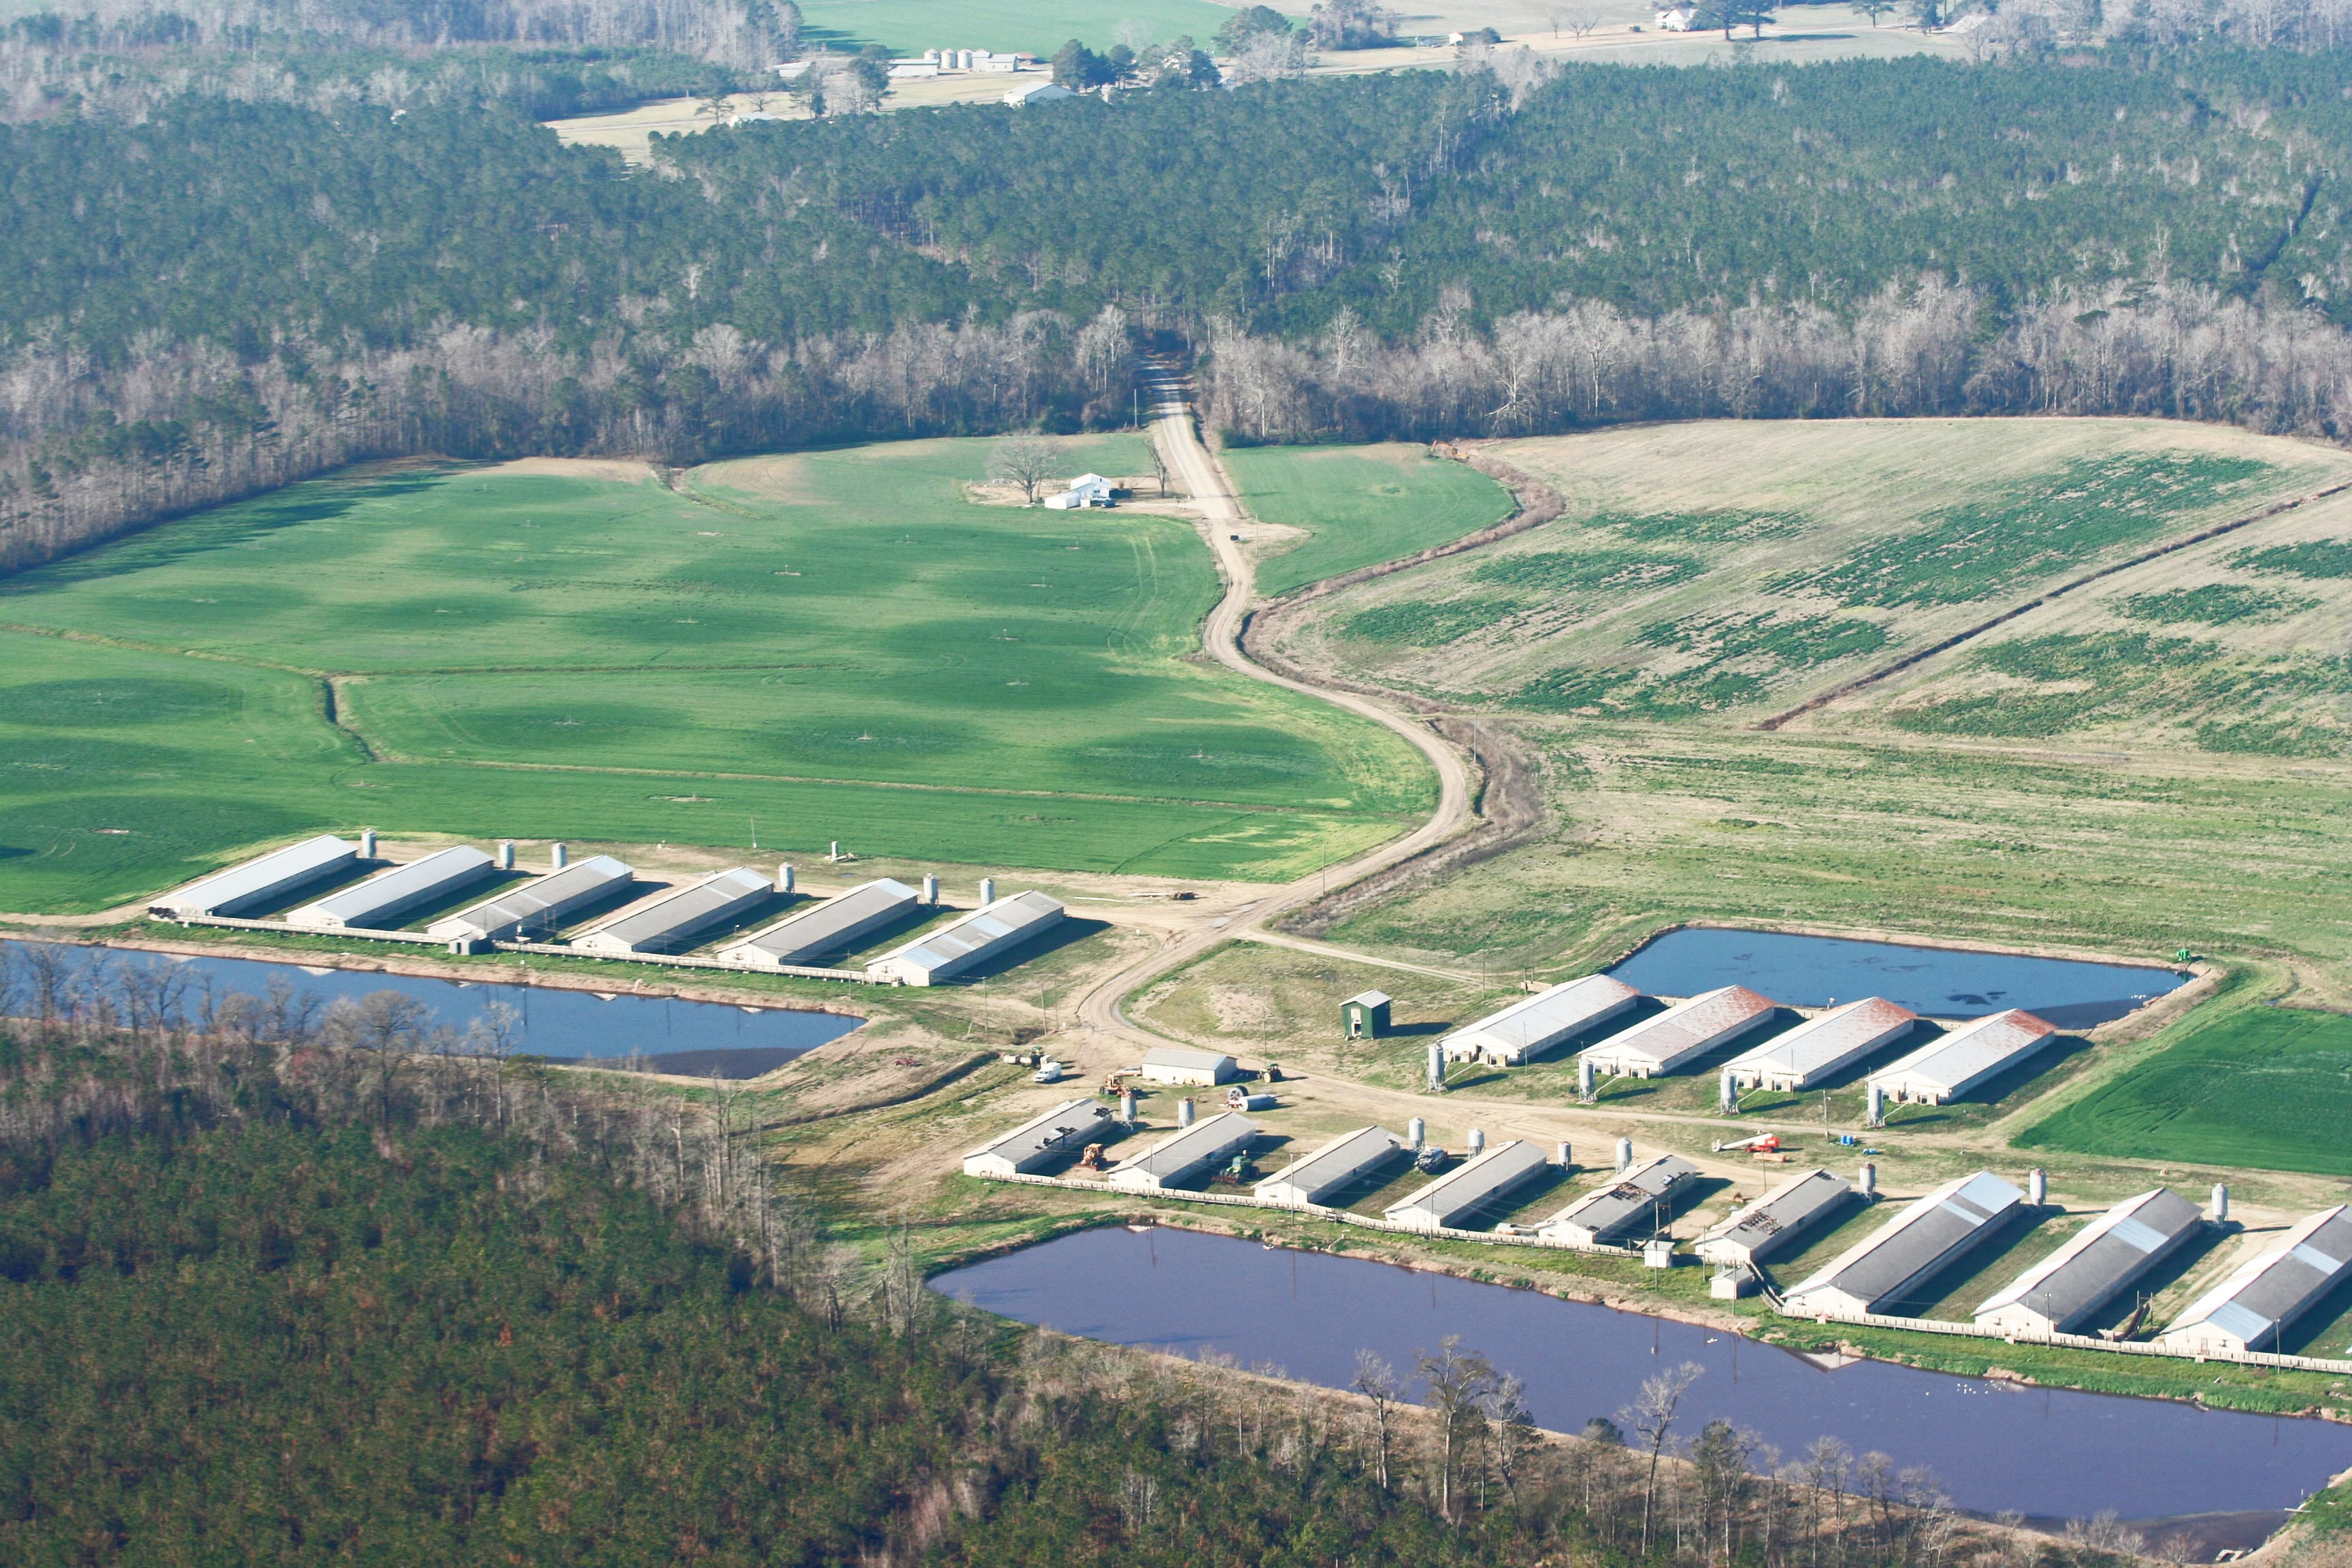 Swine facility lagoons on banks of stream and waste transport ditches to stream in North Carolina, Feb. 22 2012.